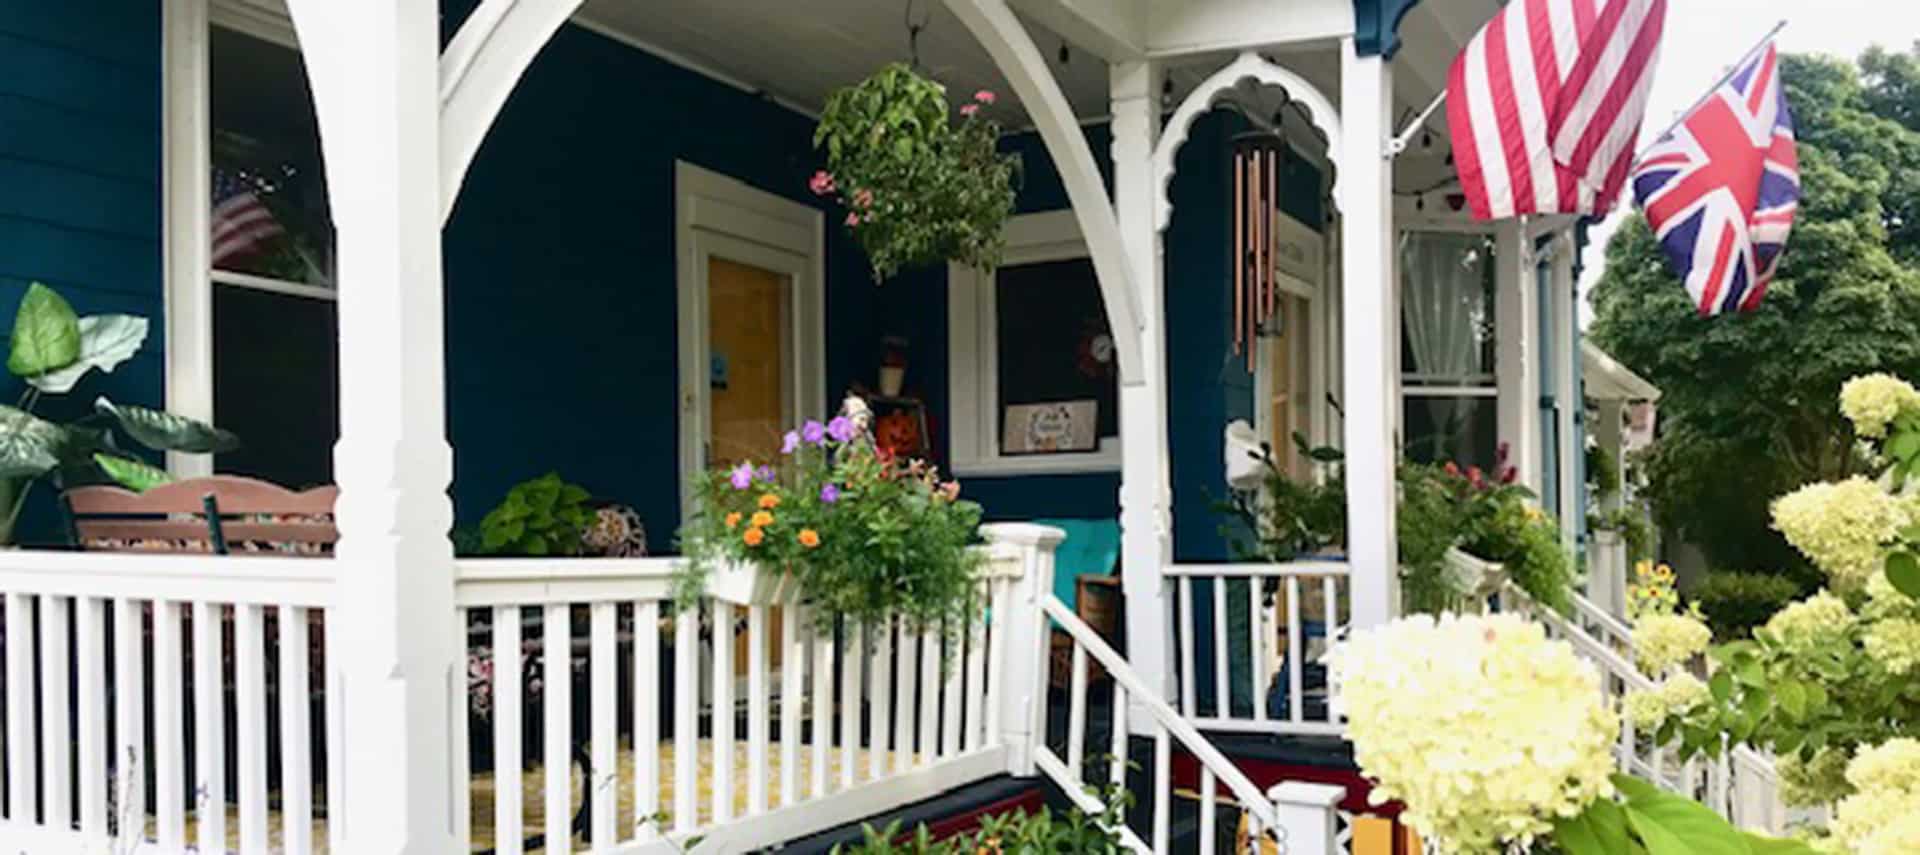 White wooden side porch with vertical stair railings and railings. Arched decorative wooden trim on the porch columns. Blue sliding, white window and door trim, yellow door, flower planters on the porch railing and hanging flower baskets.